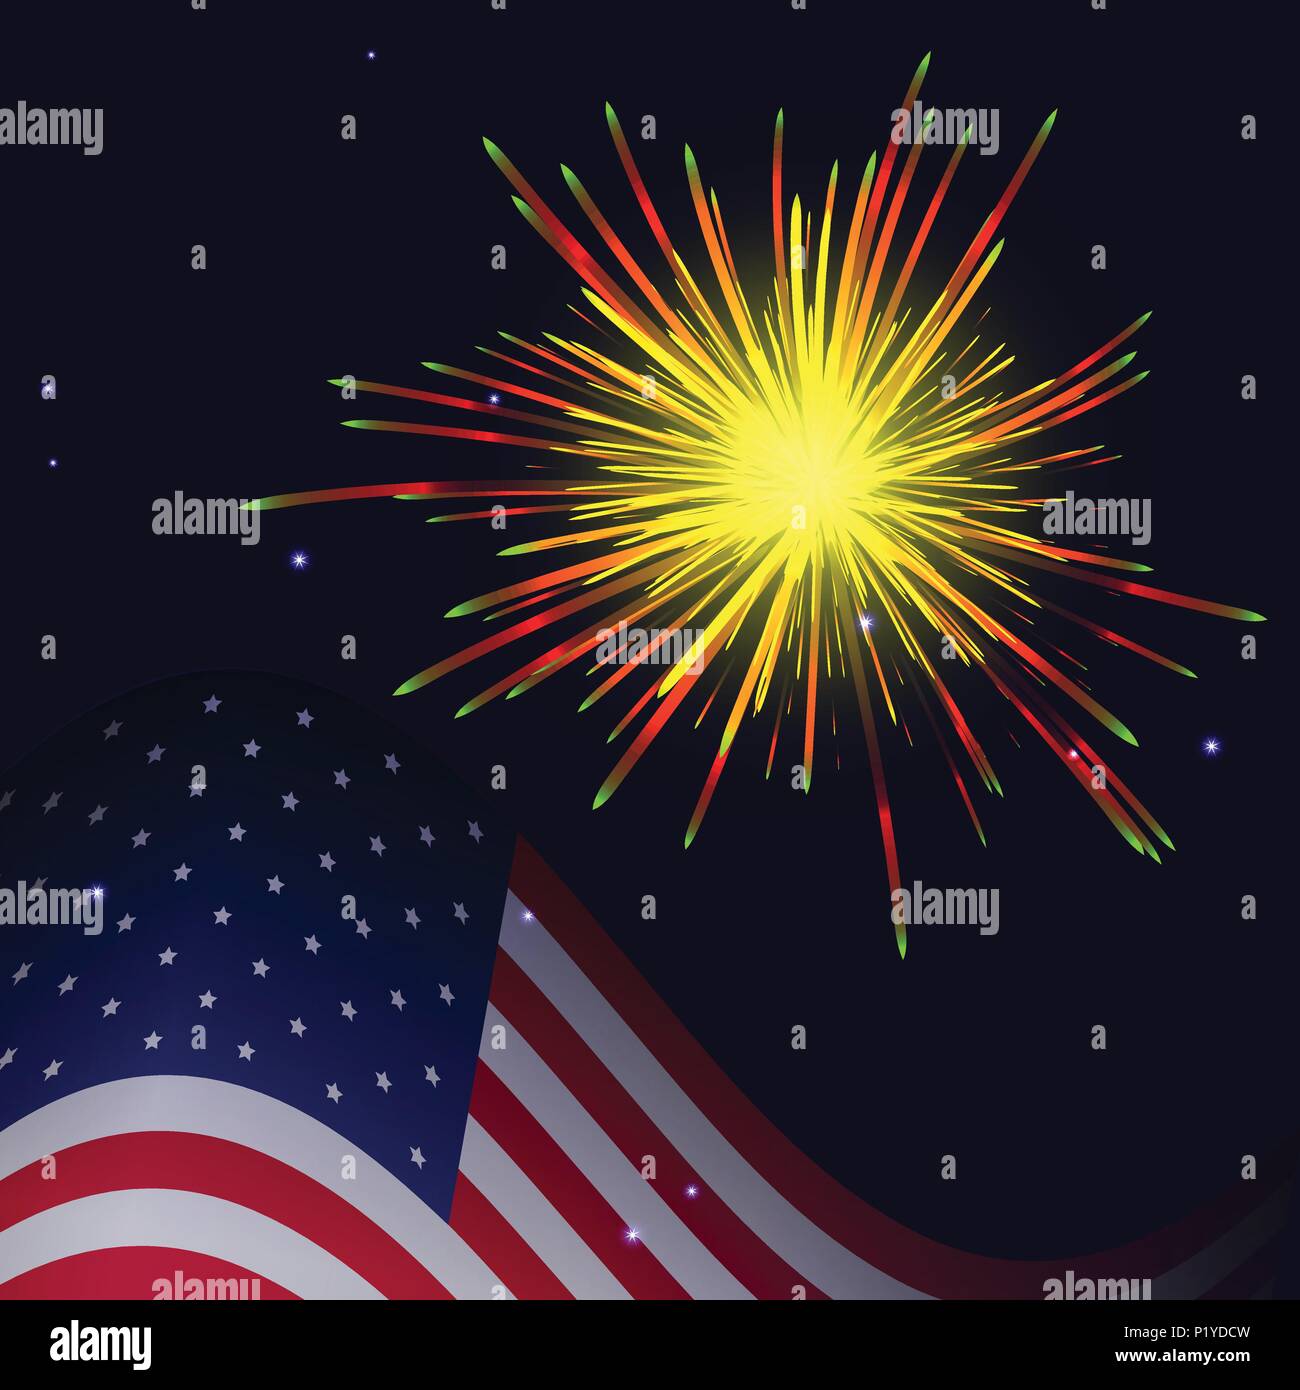 United States flag and celebration radiant yellow red green fireworks vector background. Independence Day, 4th of July holidays salute greeting card. Stock Vector